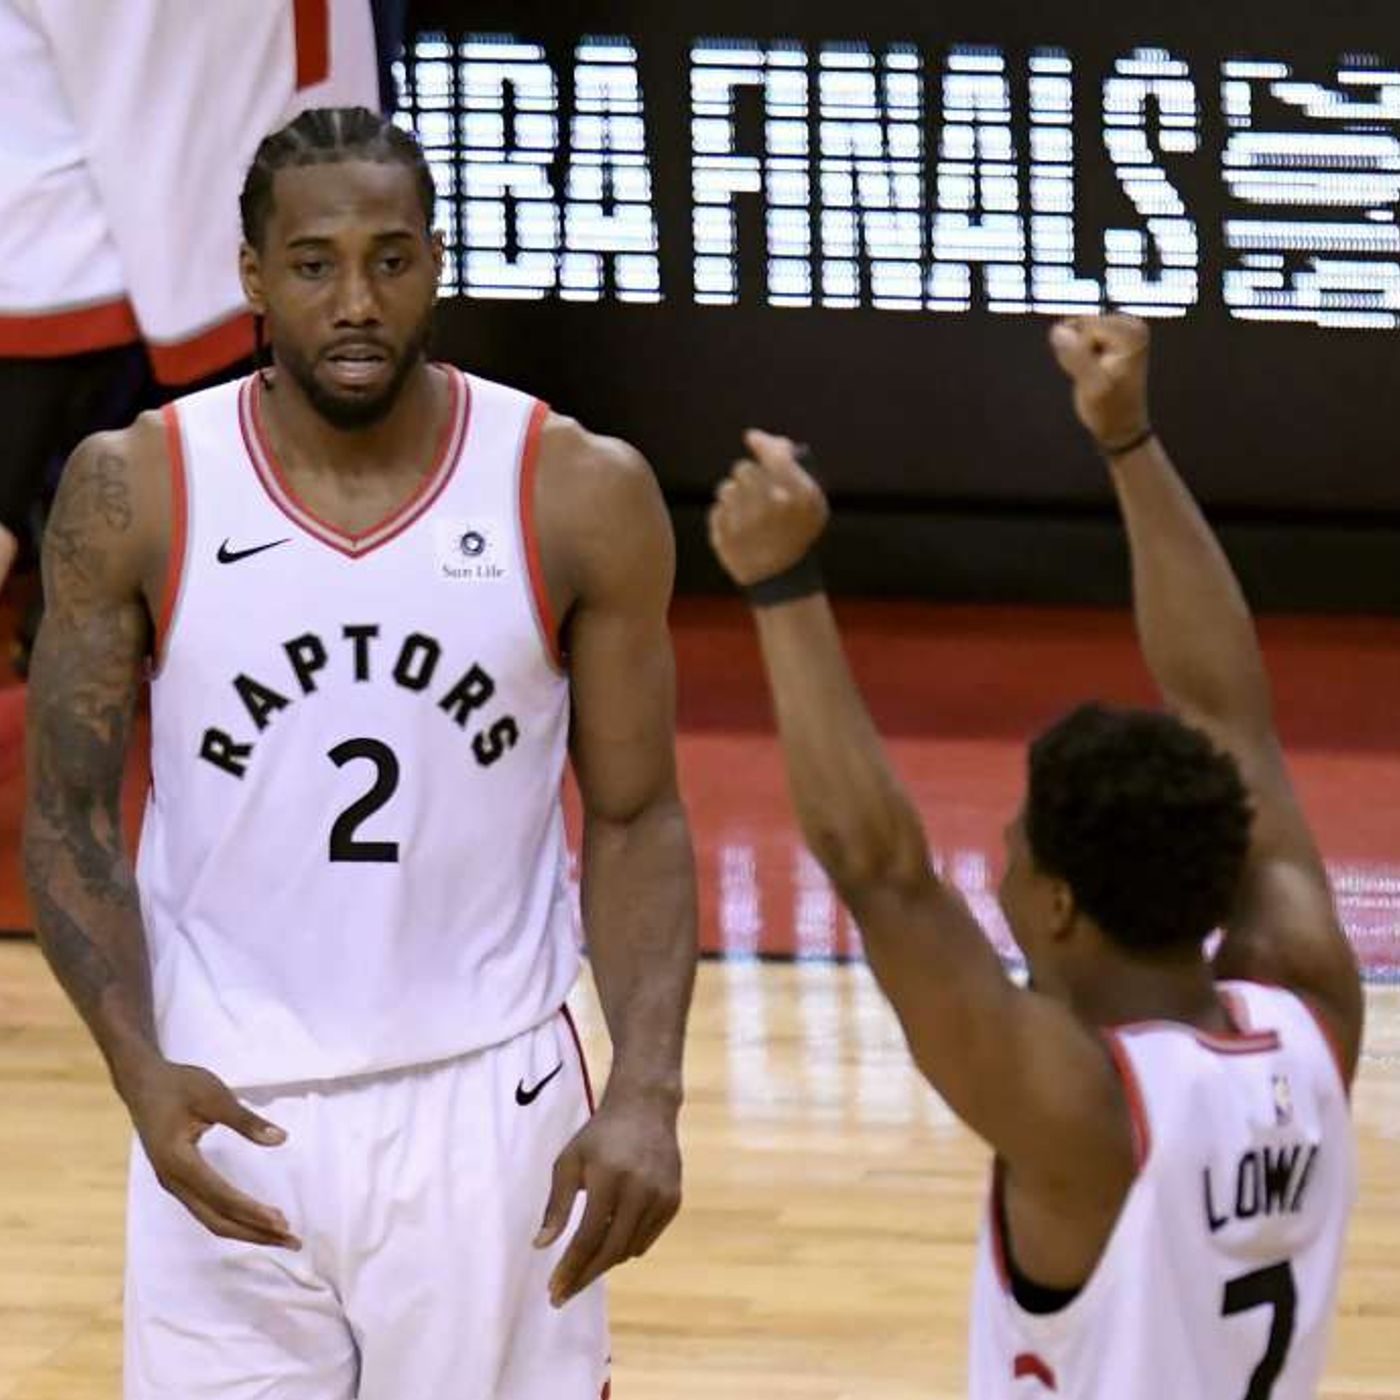 The Raptors are on the Verge of their First Championship!